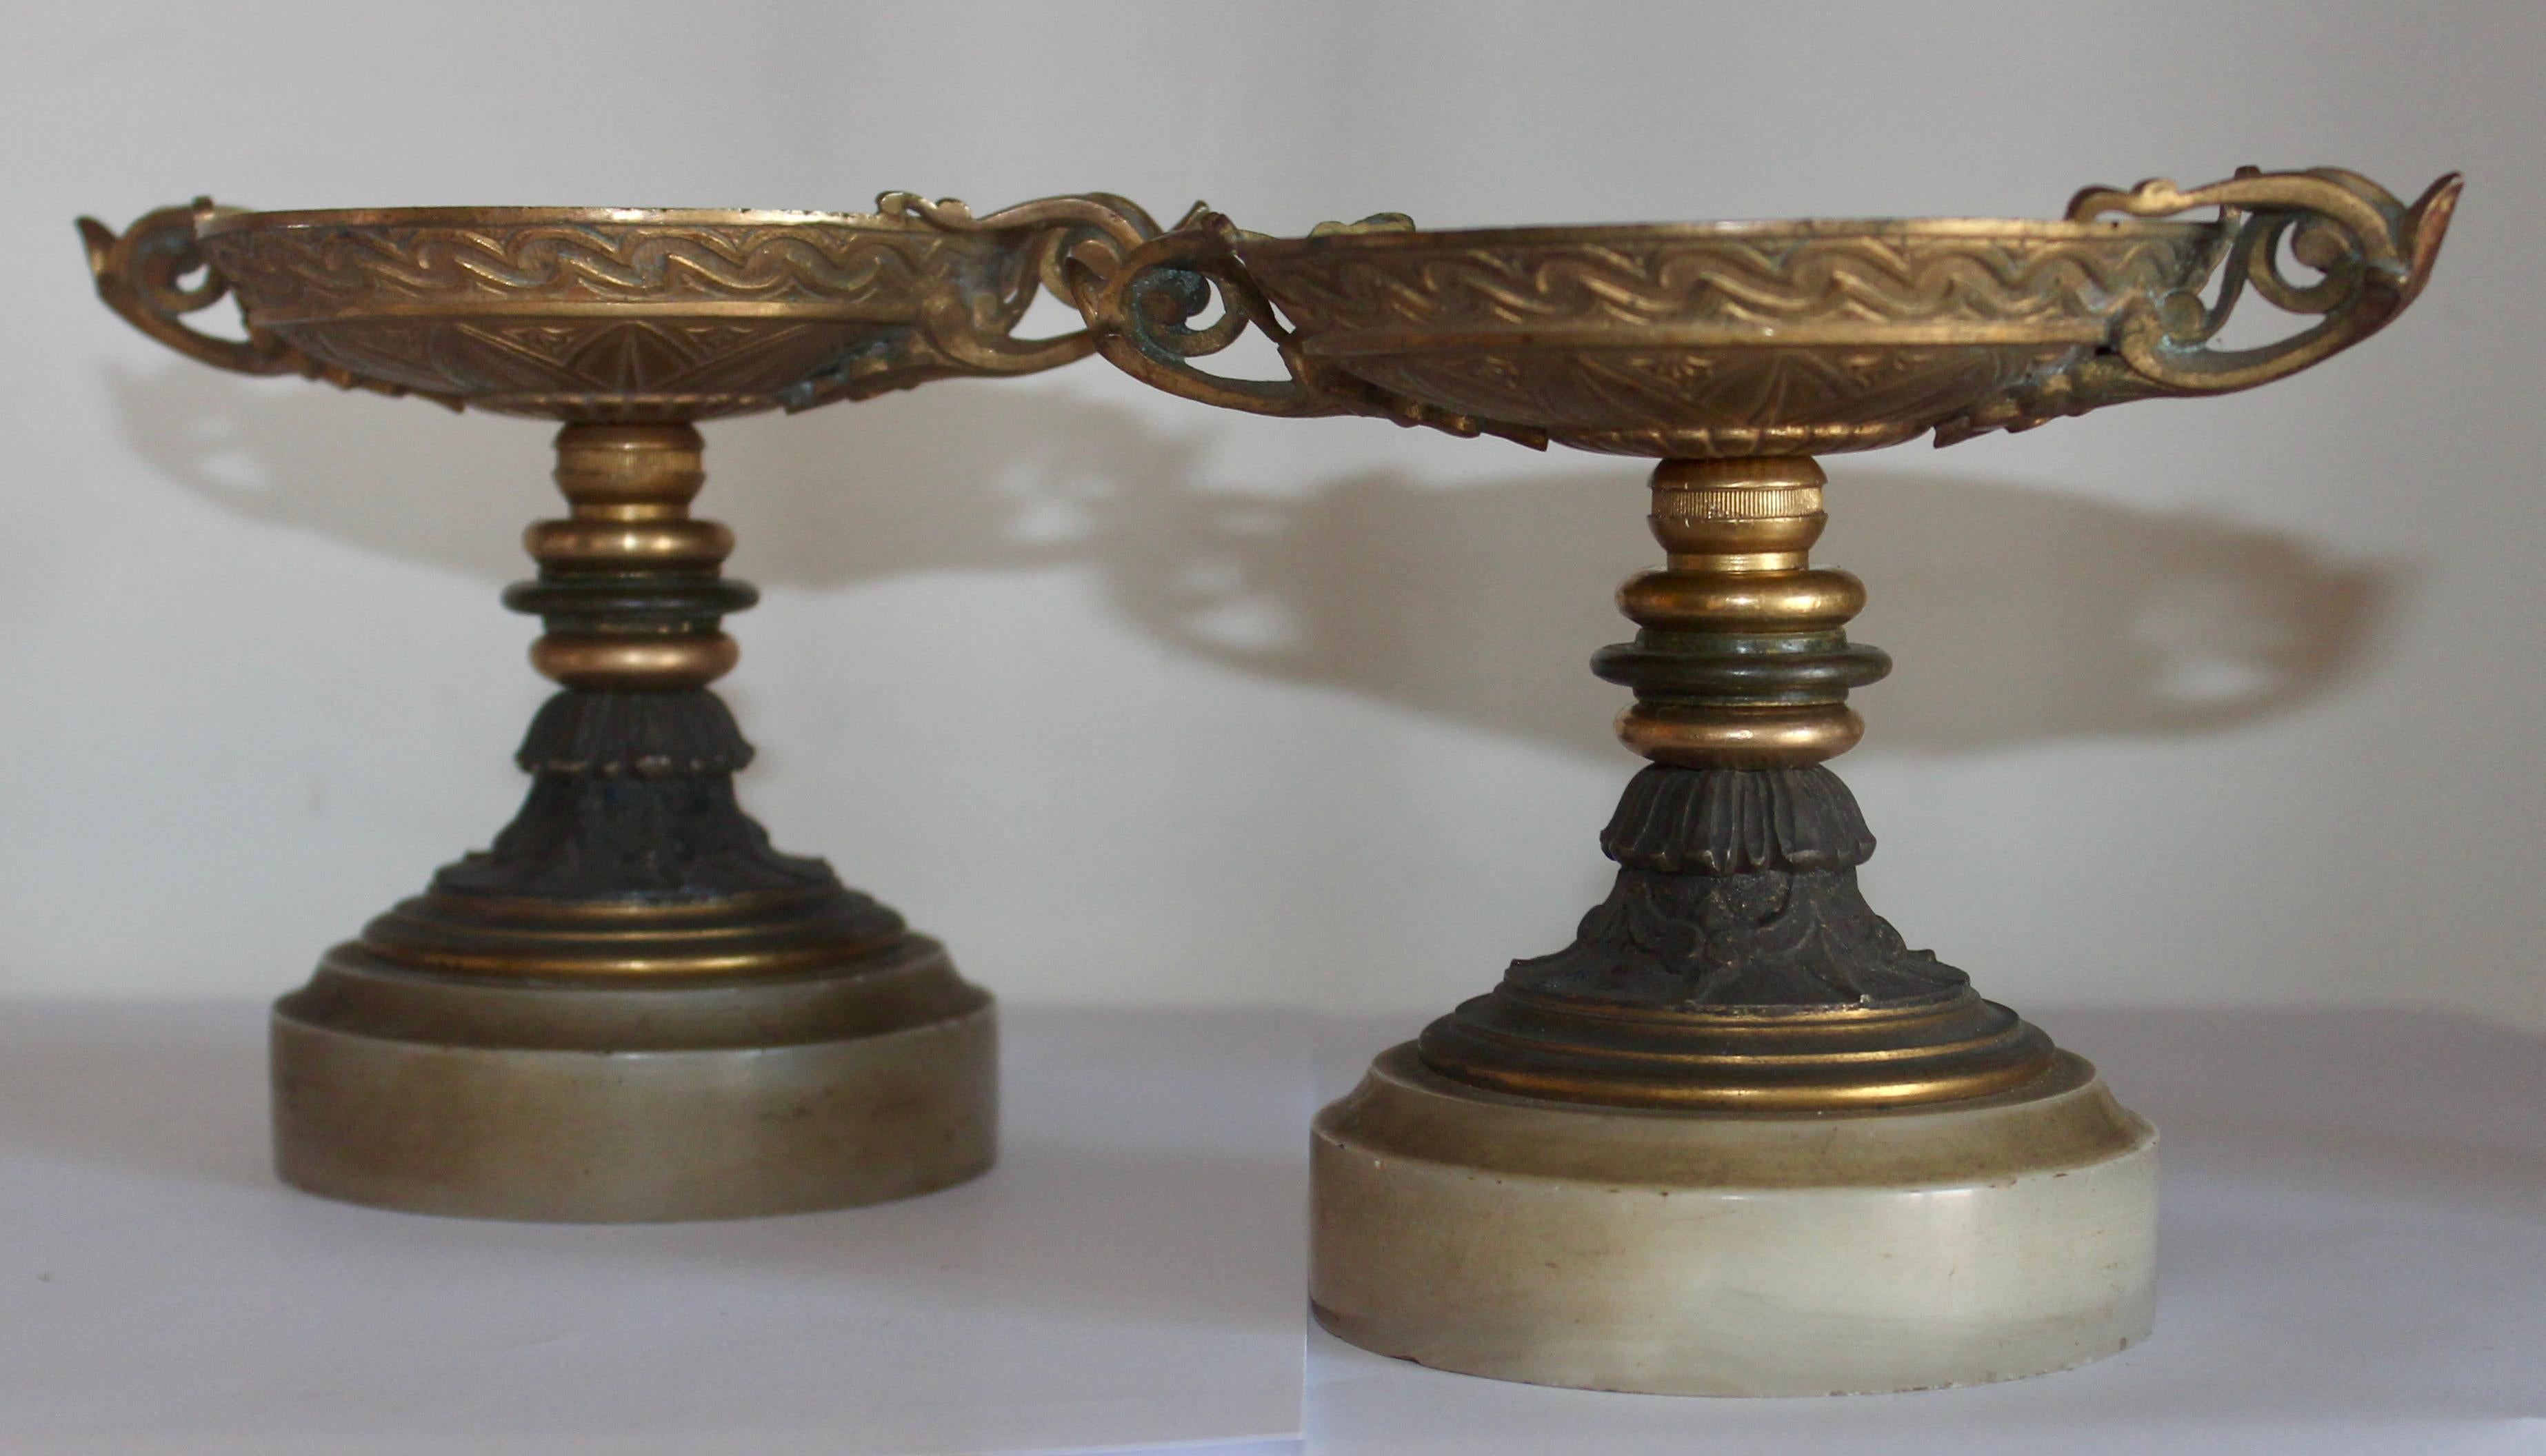 Neoclassical Revival French 19th Century Pair of Tazzas